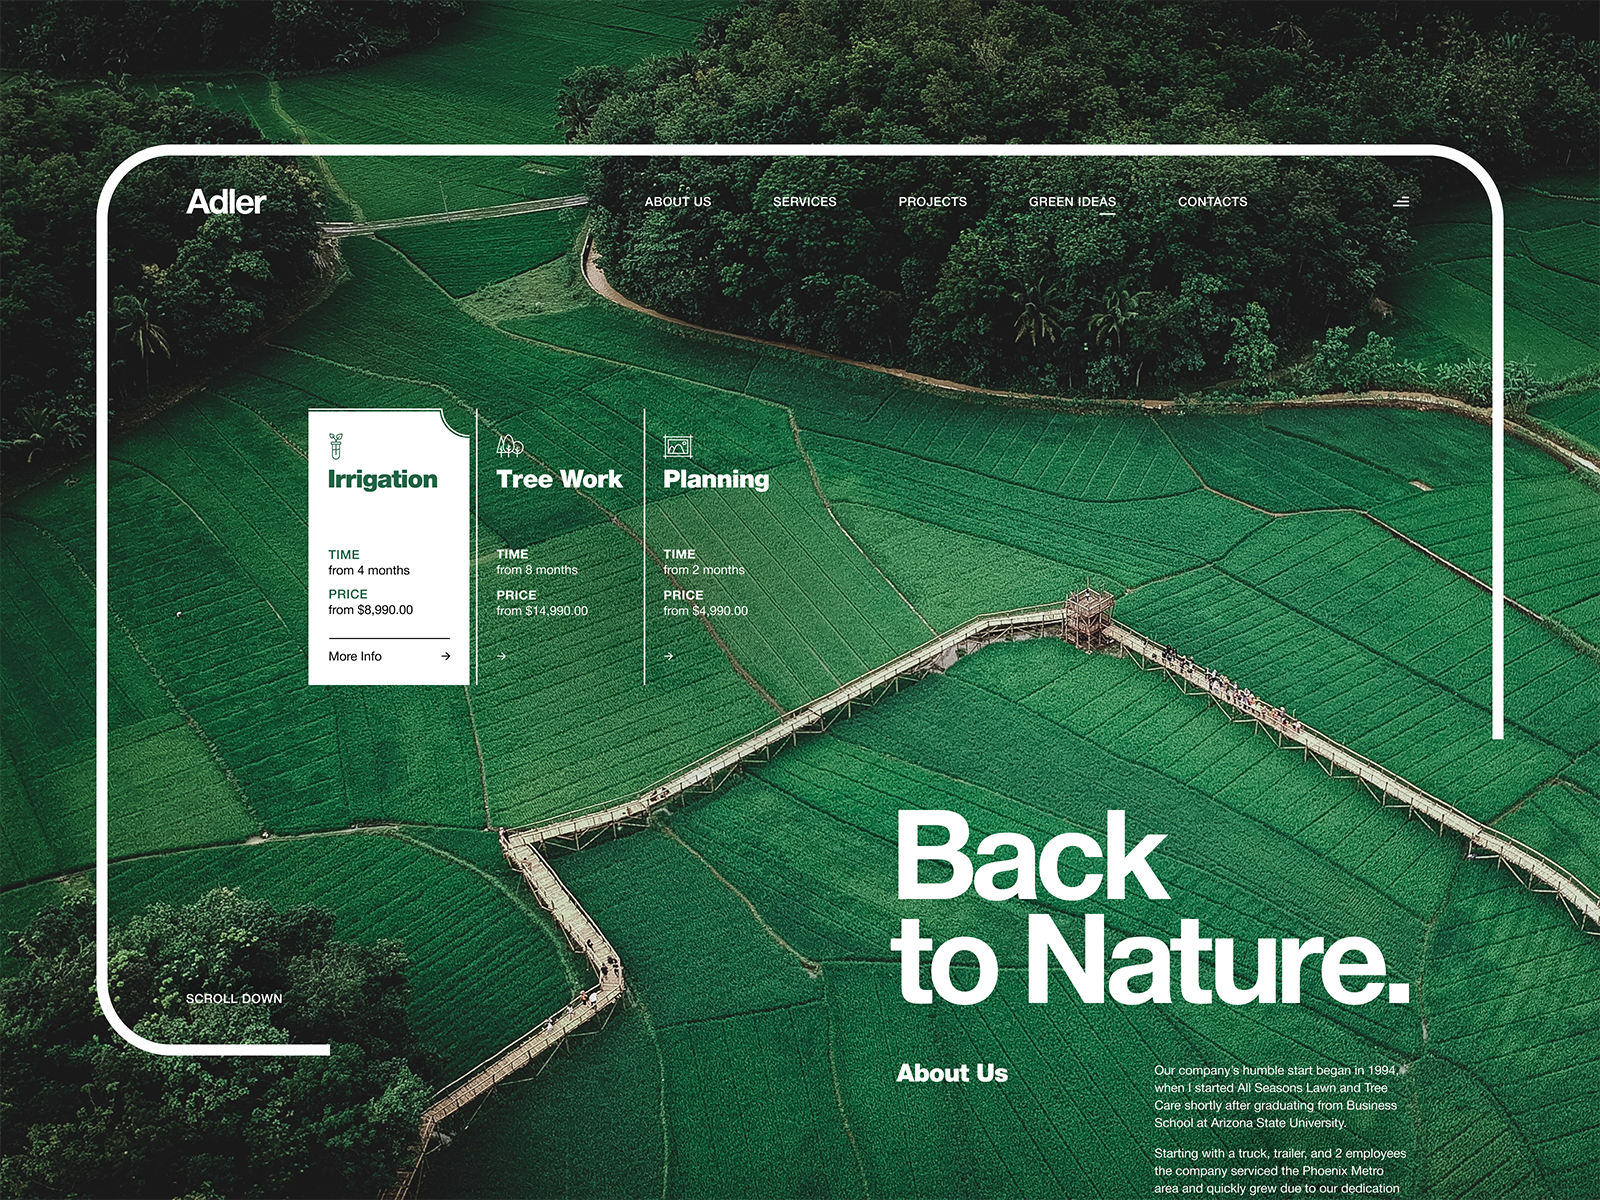 Agricultural Company 'Back to by Pavel Naumov on Dribbble